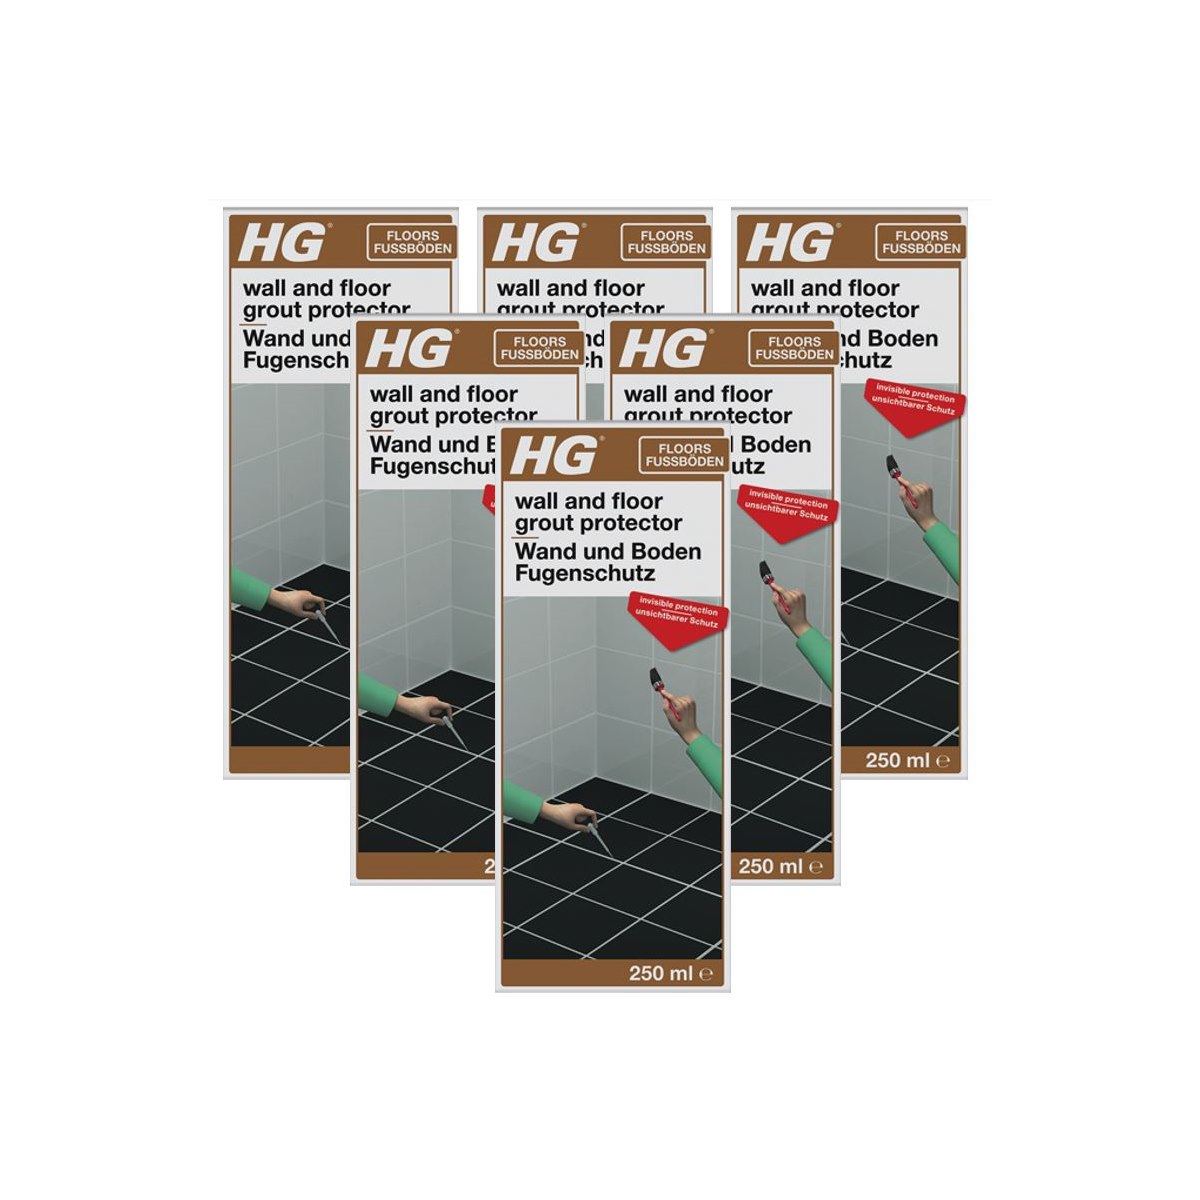 Case of 6 x HG Wall and Floor Grout Protector